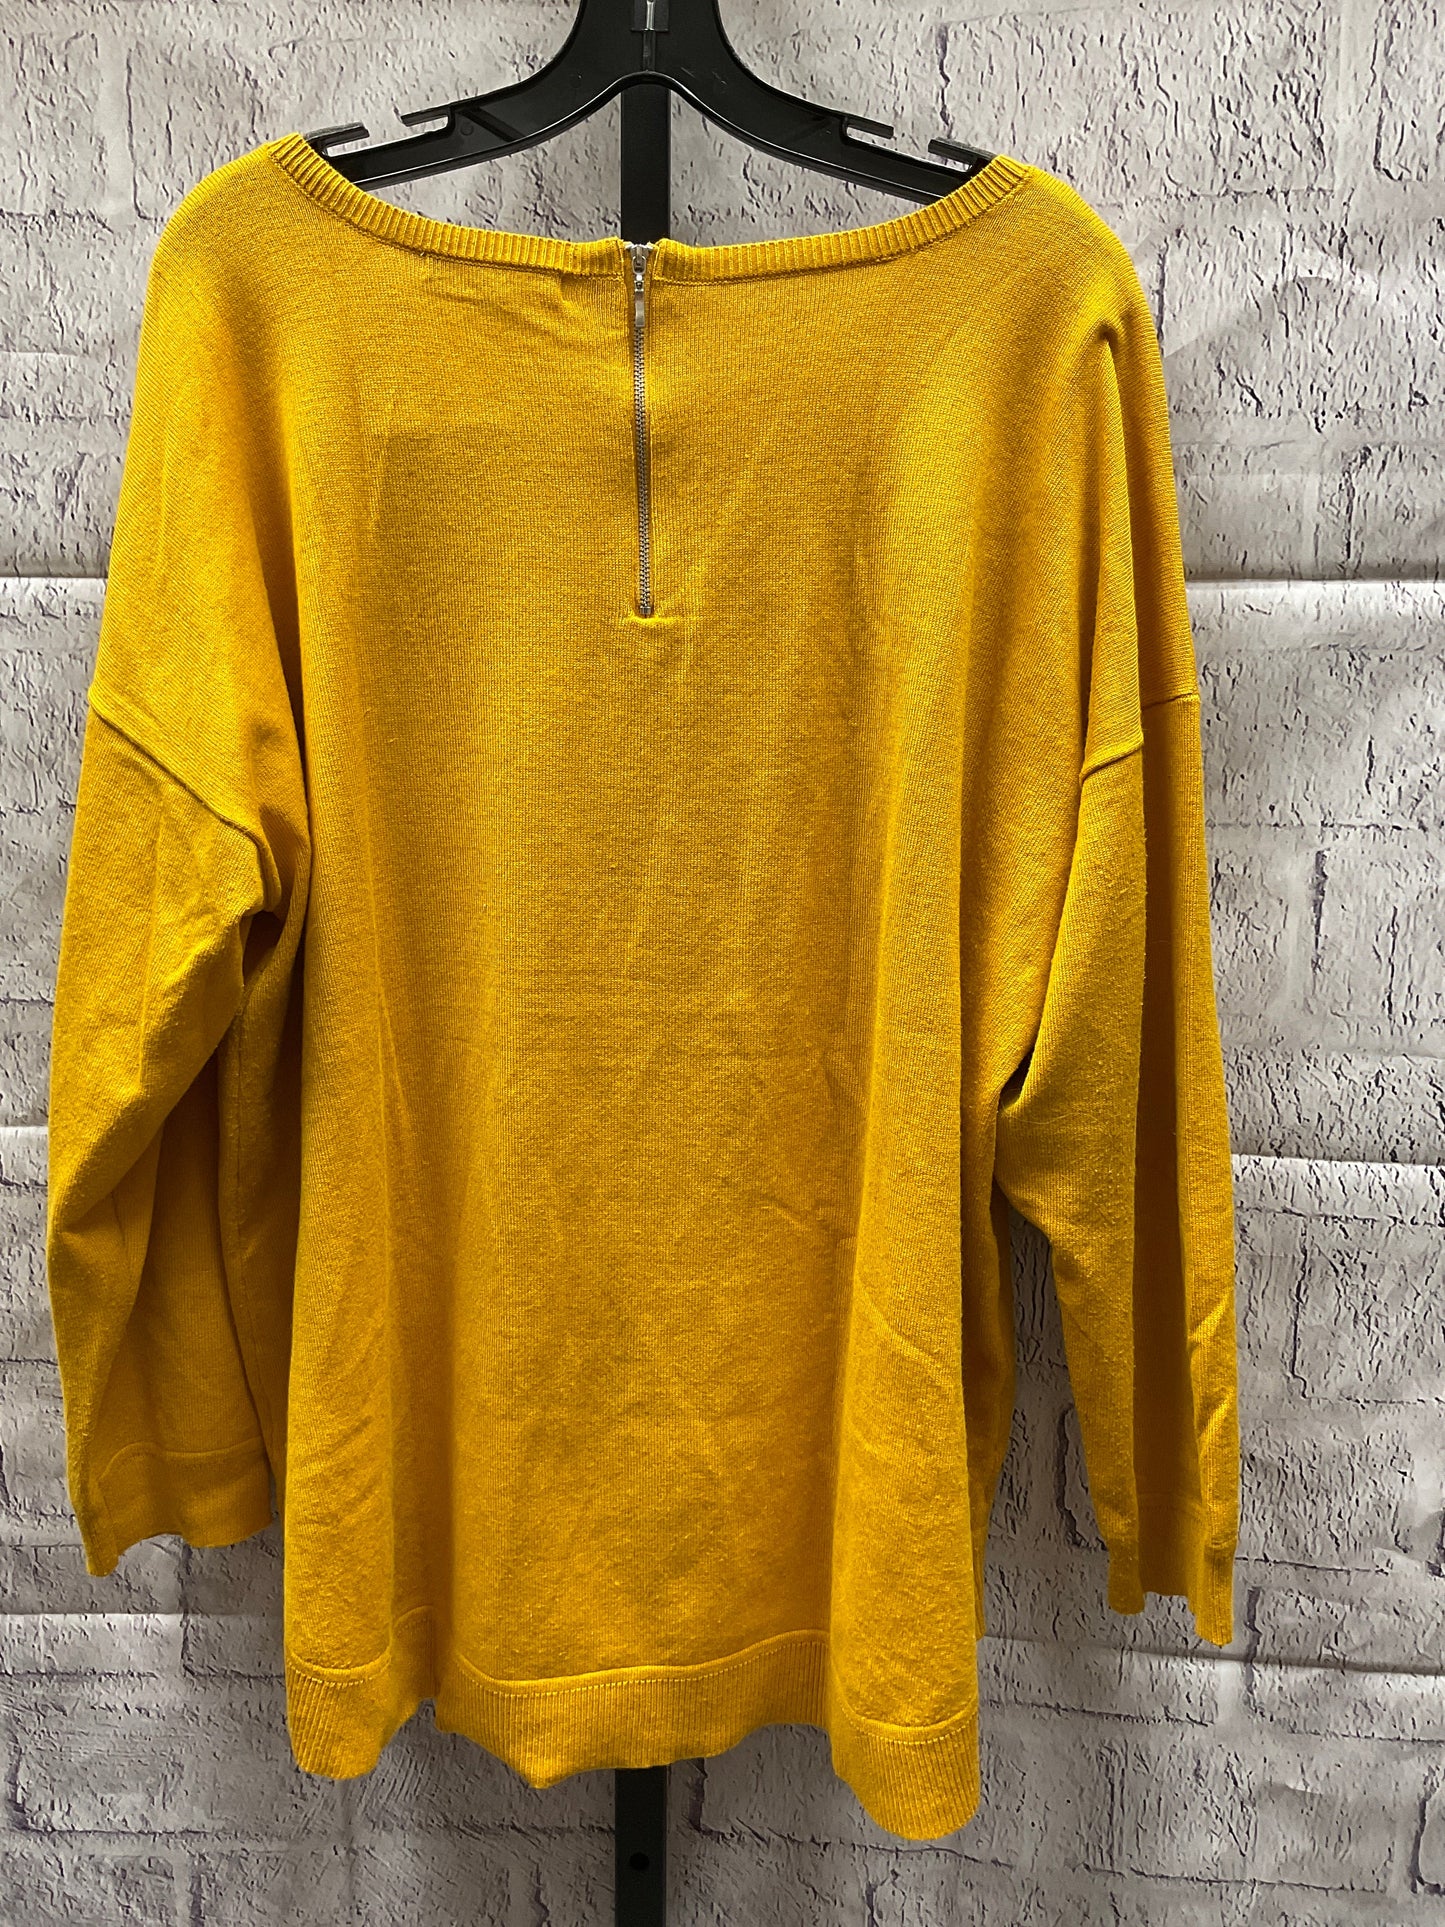 Top Long Sleeve By Cable And Gauge  Size: 2x